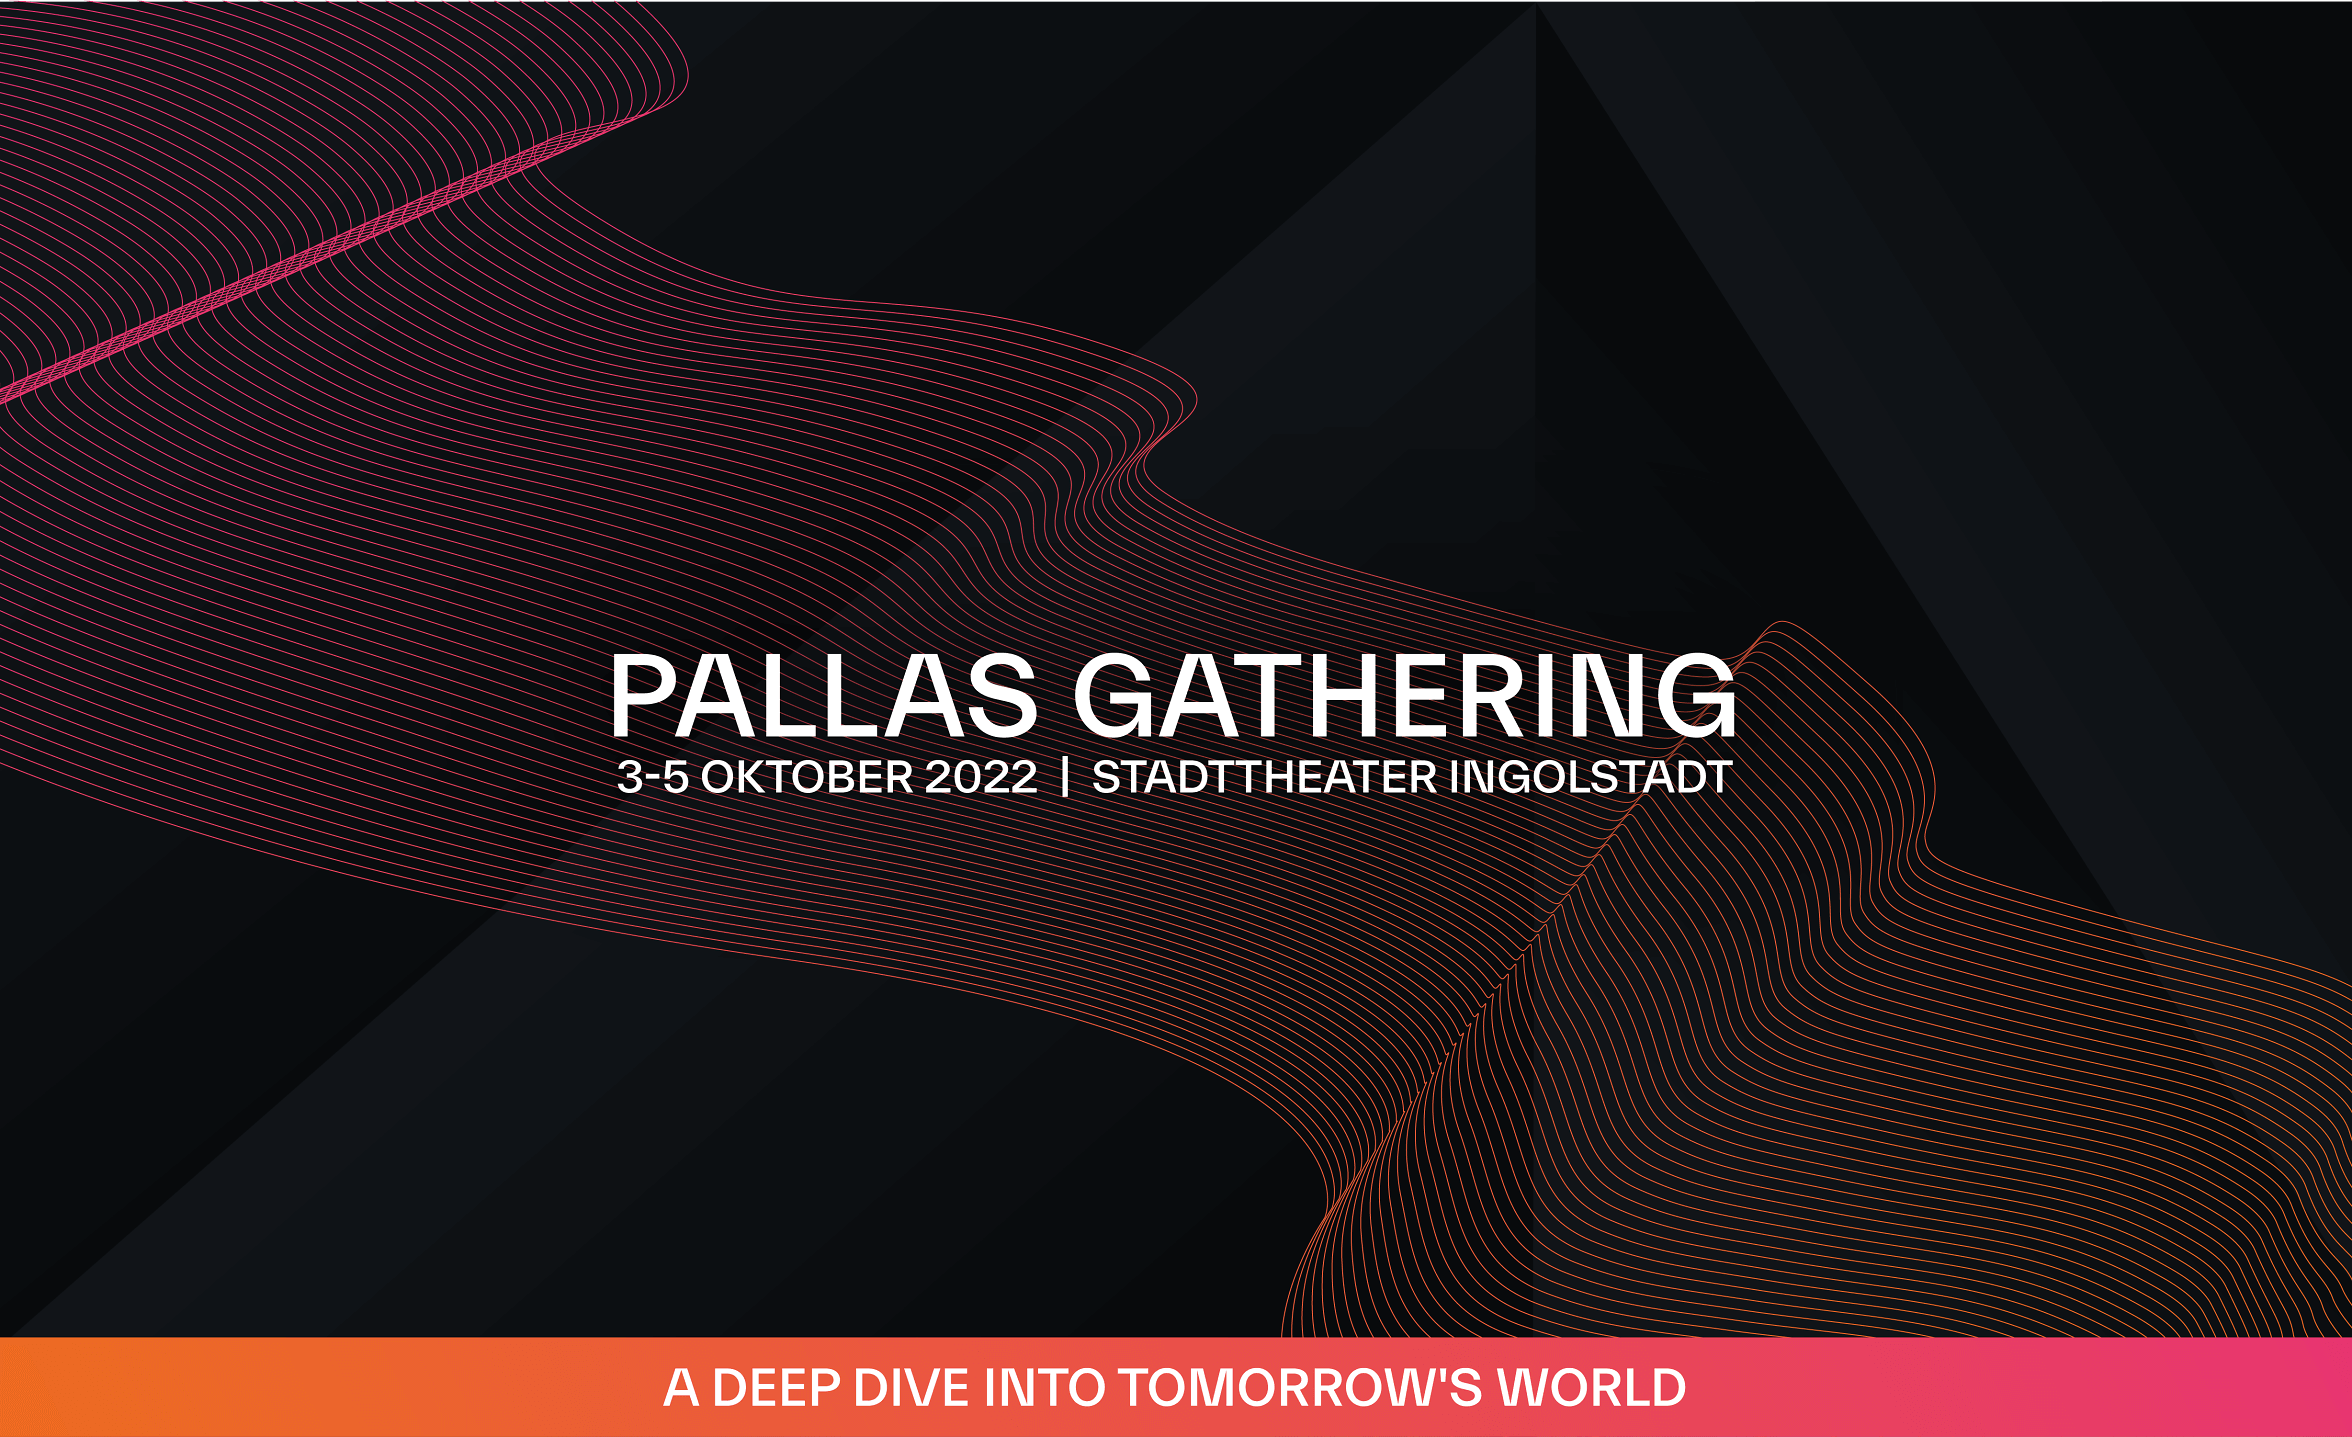 Event-Image for 'Pallas Gathering - A Deep Dive Into Tomorrow's World'